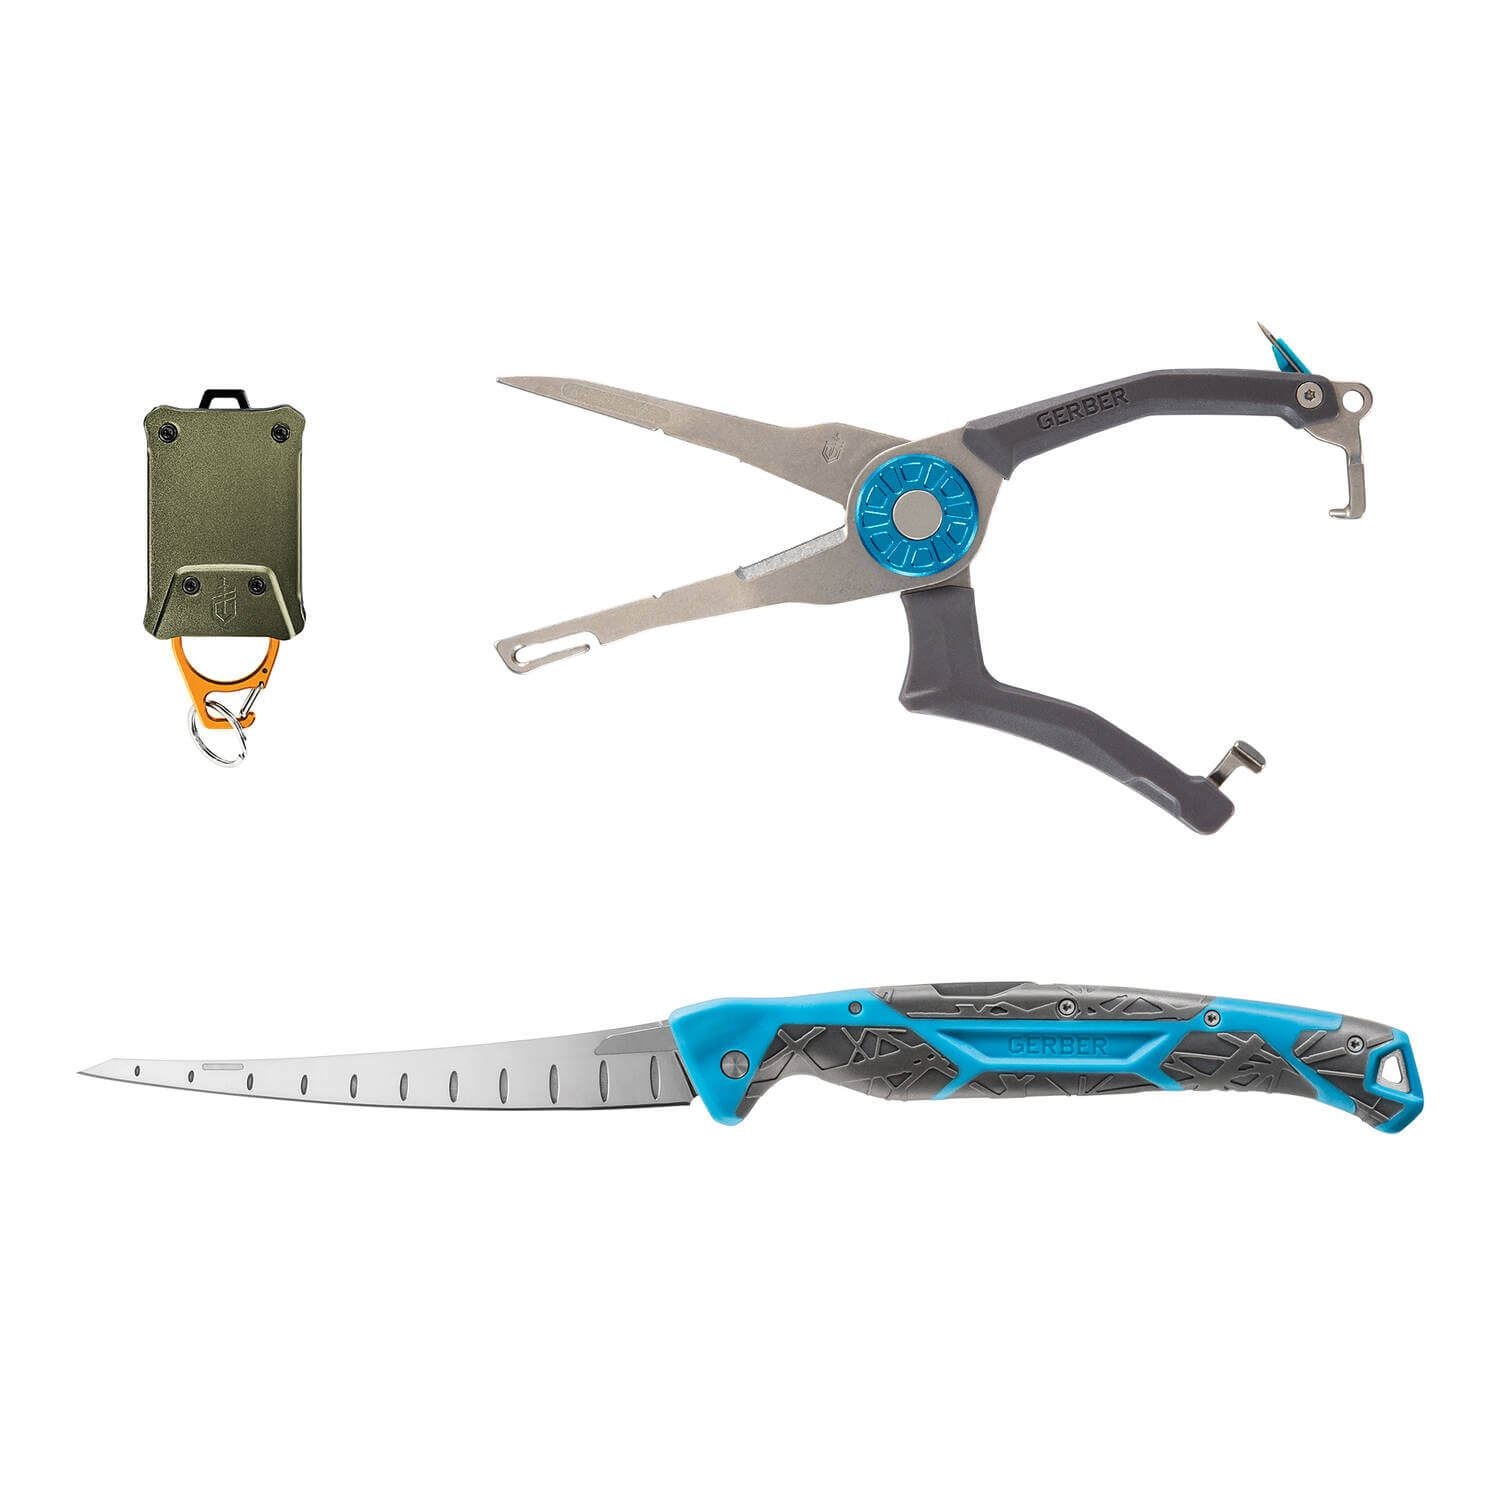 Gerber Gear - Camping, Hiking, Fishing Activity Pack Collections